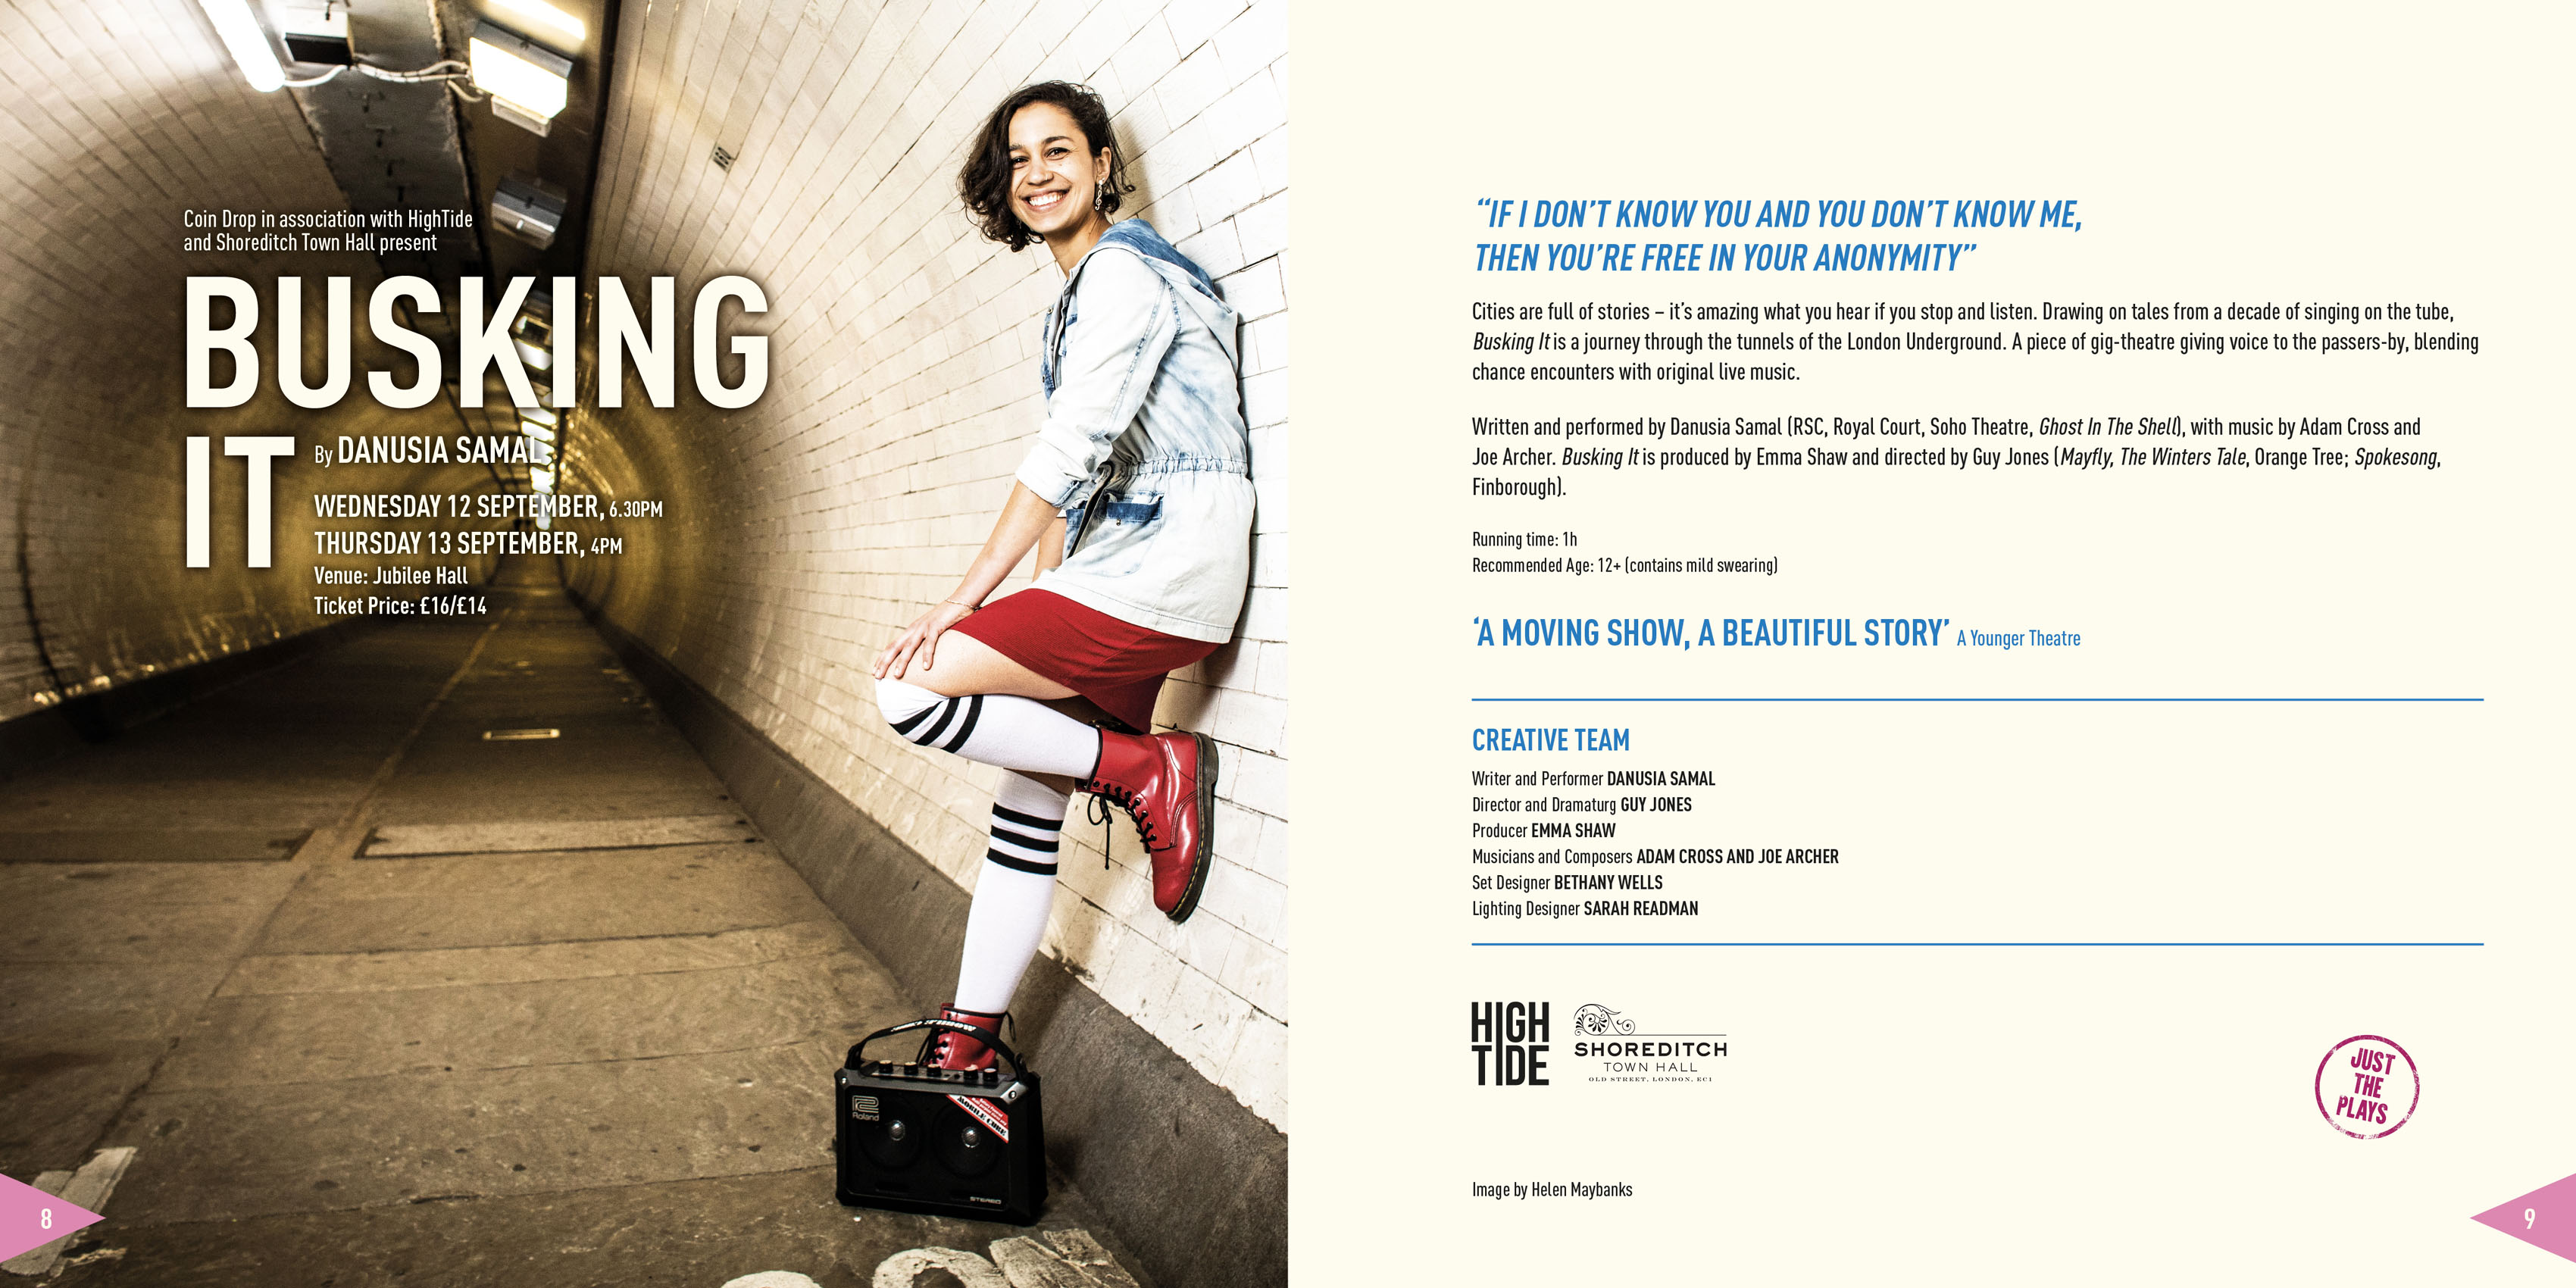 Promotional image for Busking It at the Aldeburgh Festival